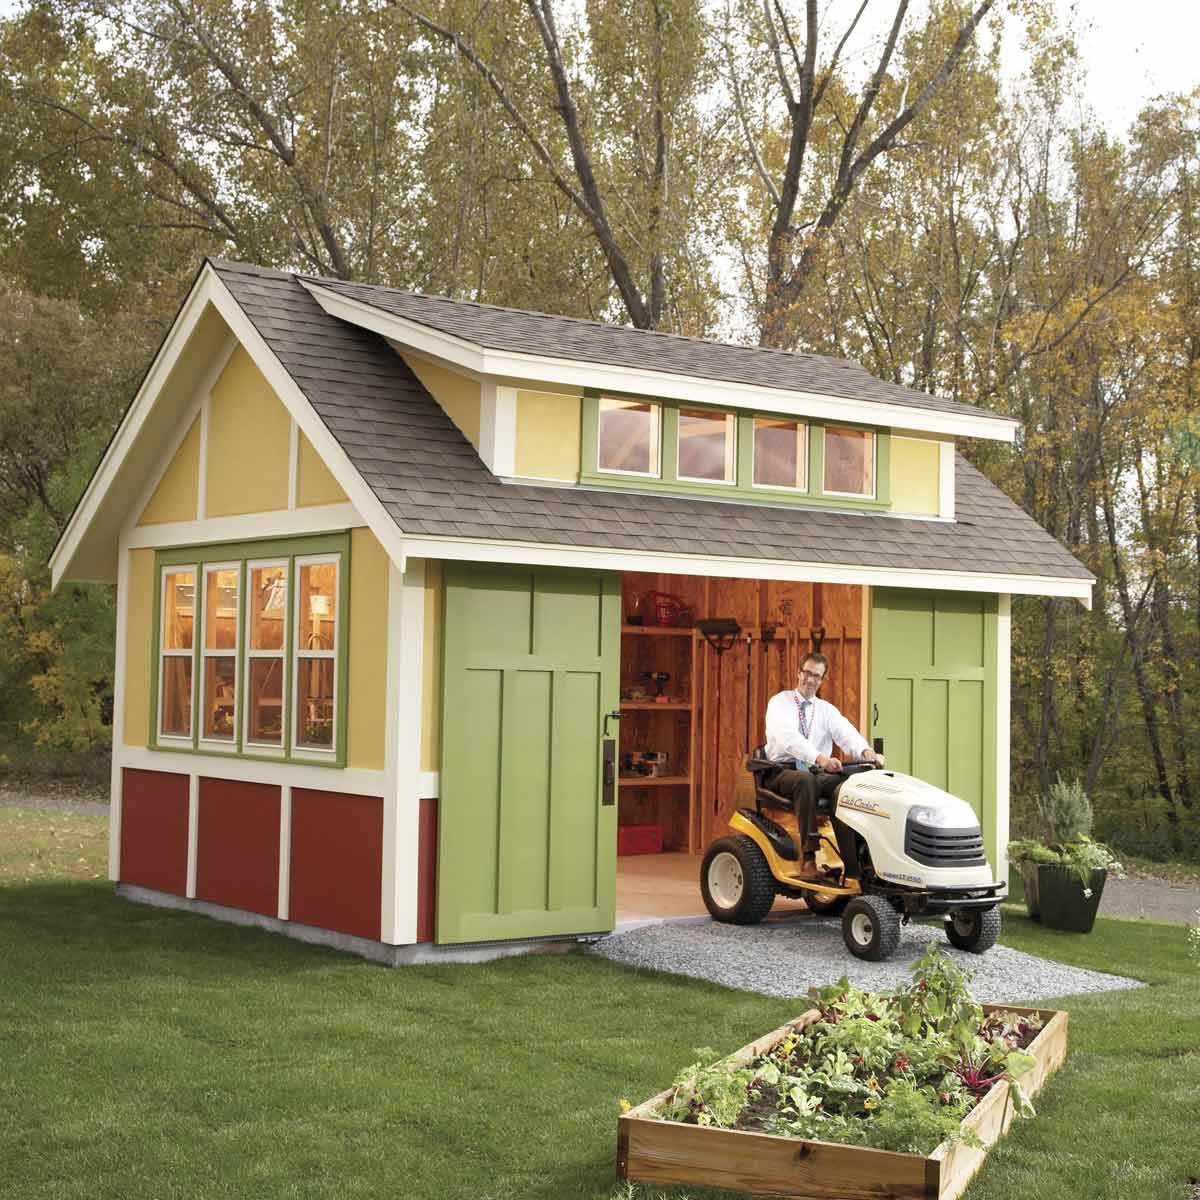 How to Build a Shed: 2011 Garden Shed Family Handyman